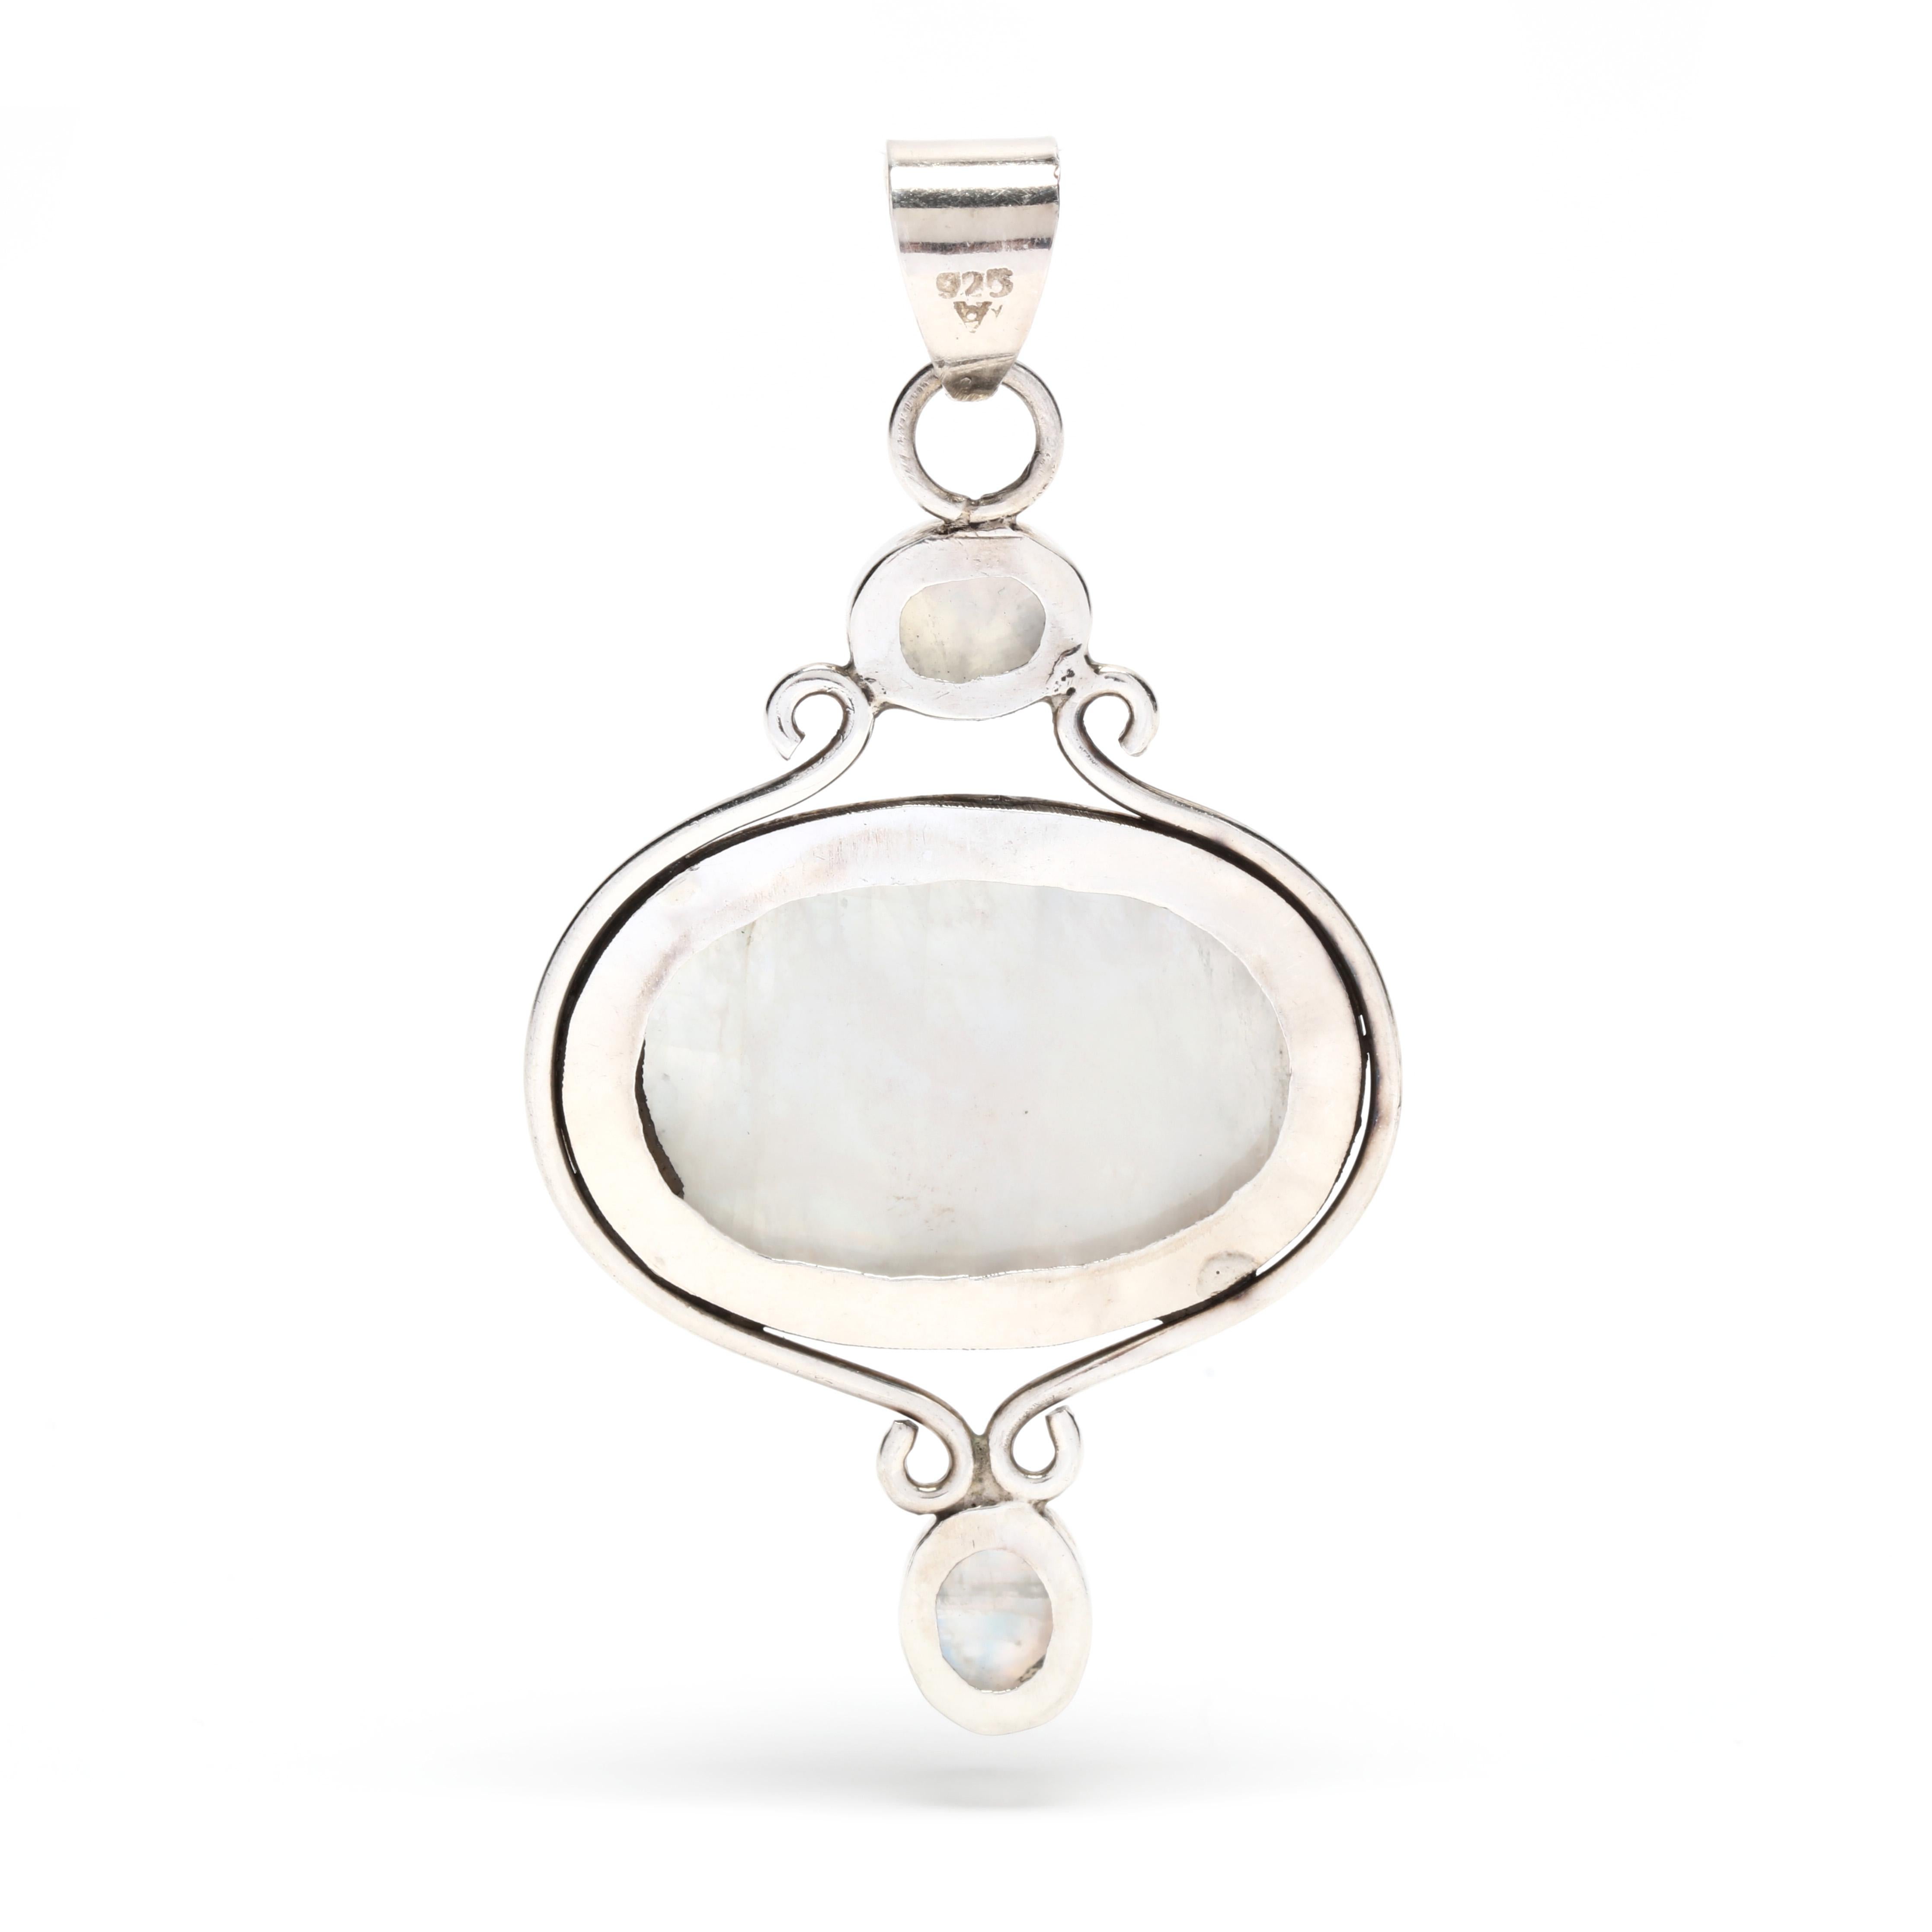 This stunning Moonstone Pendant is handmade from sterling silver and features a full moon design. The pendant measures 2 3/4 inches long and is sure to be a beautiful addition to any jewelry collection. The moonstone reflects the light from the